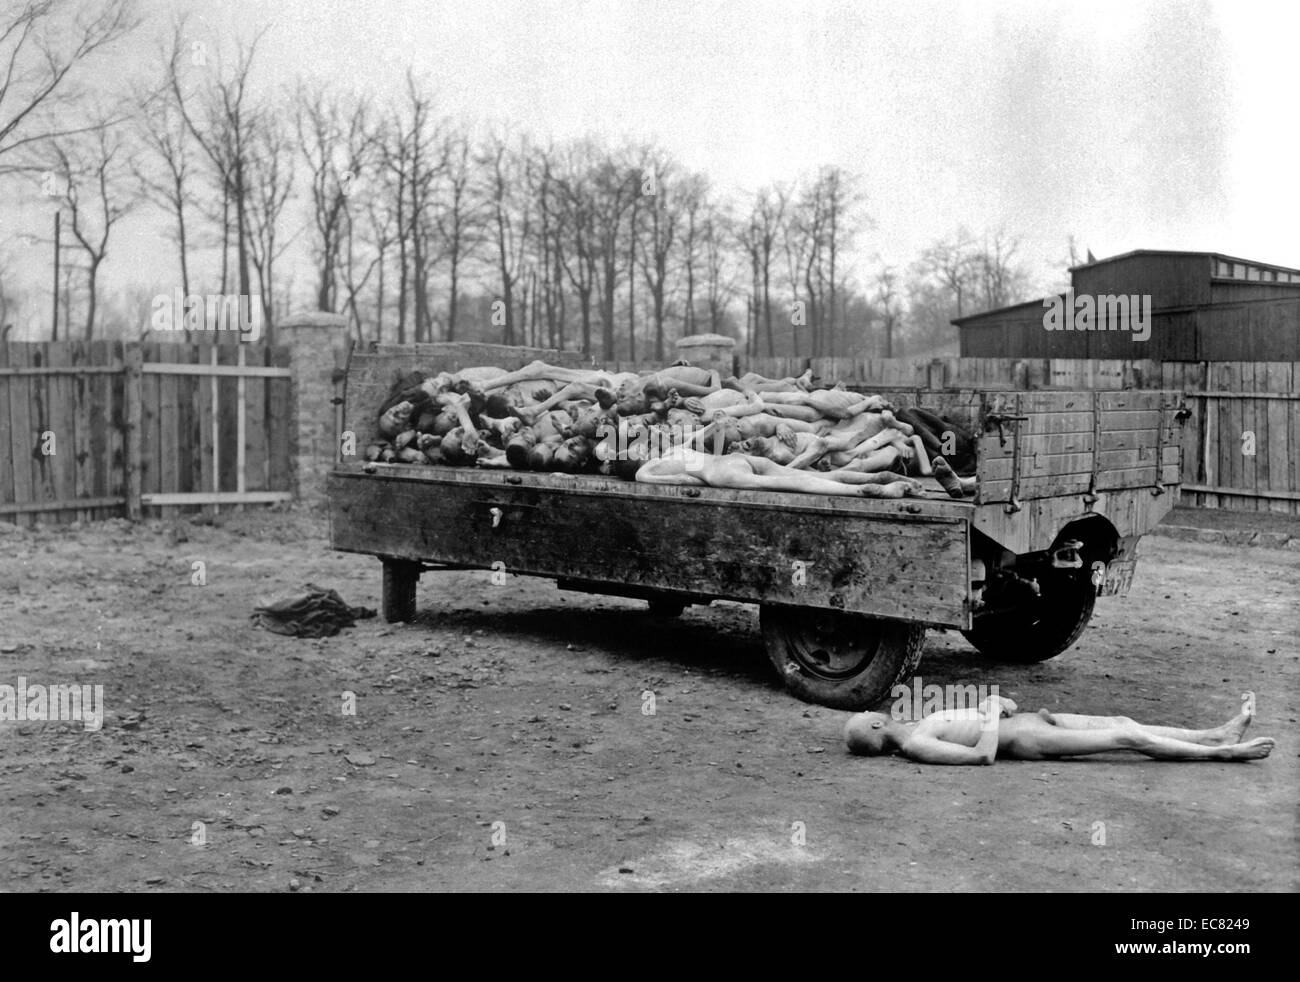 Buchenwald concentration camp - The Image shows dead bodies of those that were held captive as prisoners of war. Once the camps were liberated, allies transported the bodies away to have them cremated. Dated shortly after the end of the Second World War in 1945. Stock Photo